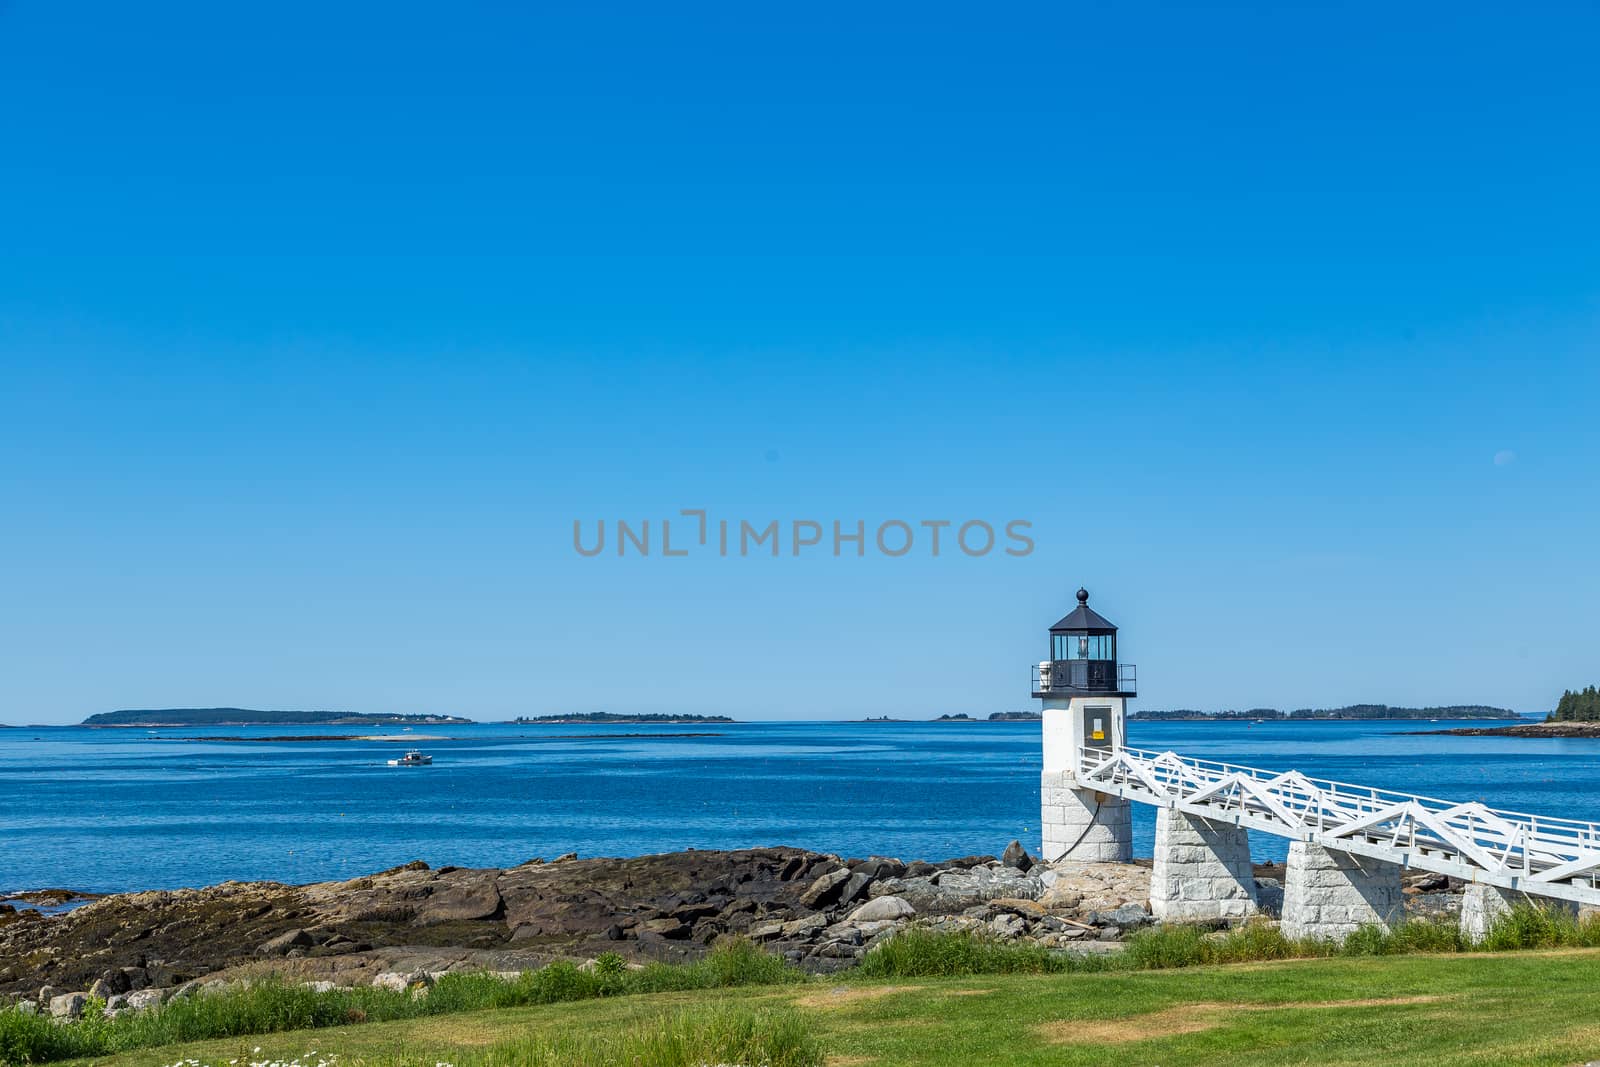 Marshall Point Light Station is a lighthouse at the entrance of Port Clyde Harbor in Port Clyde, Maine. The light station was established in 1832.